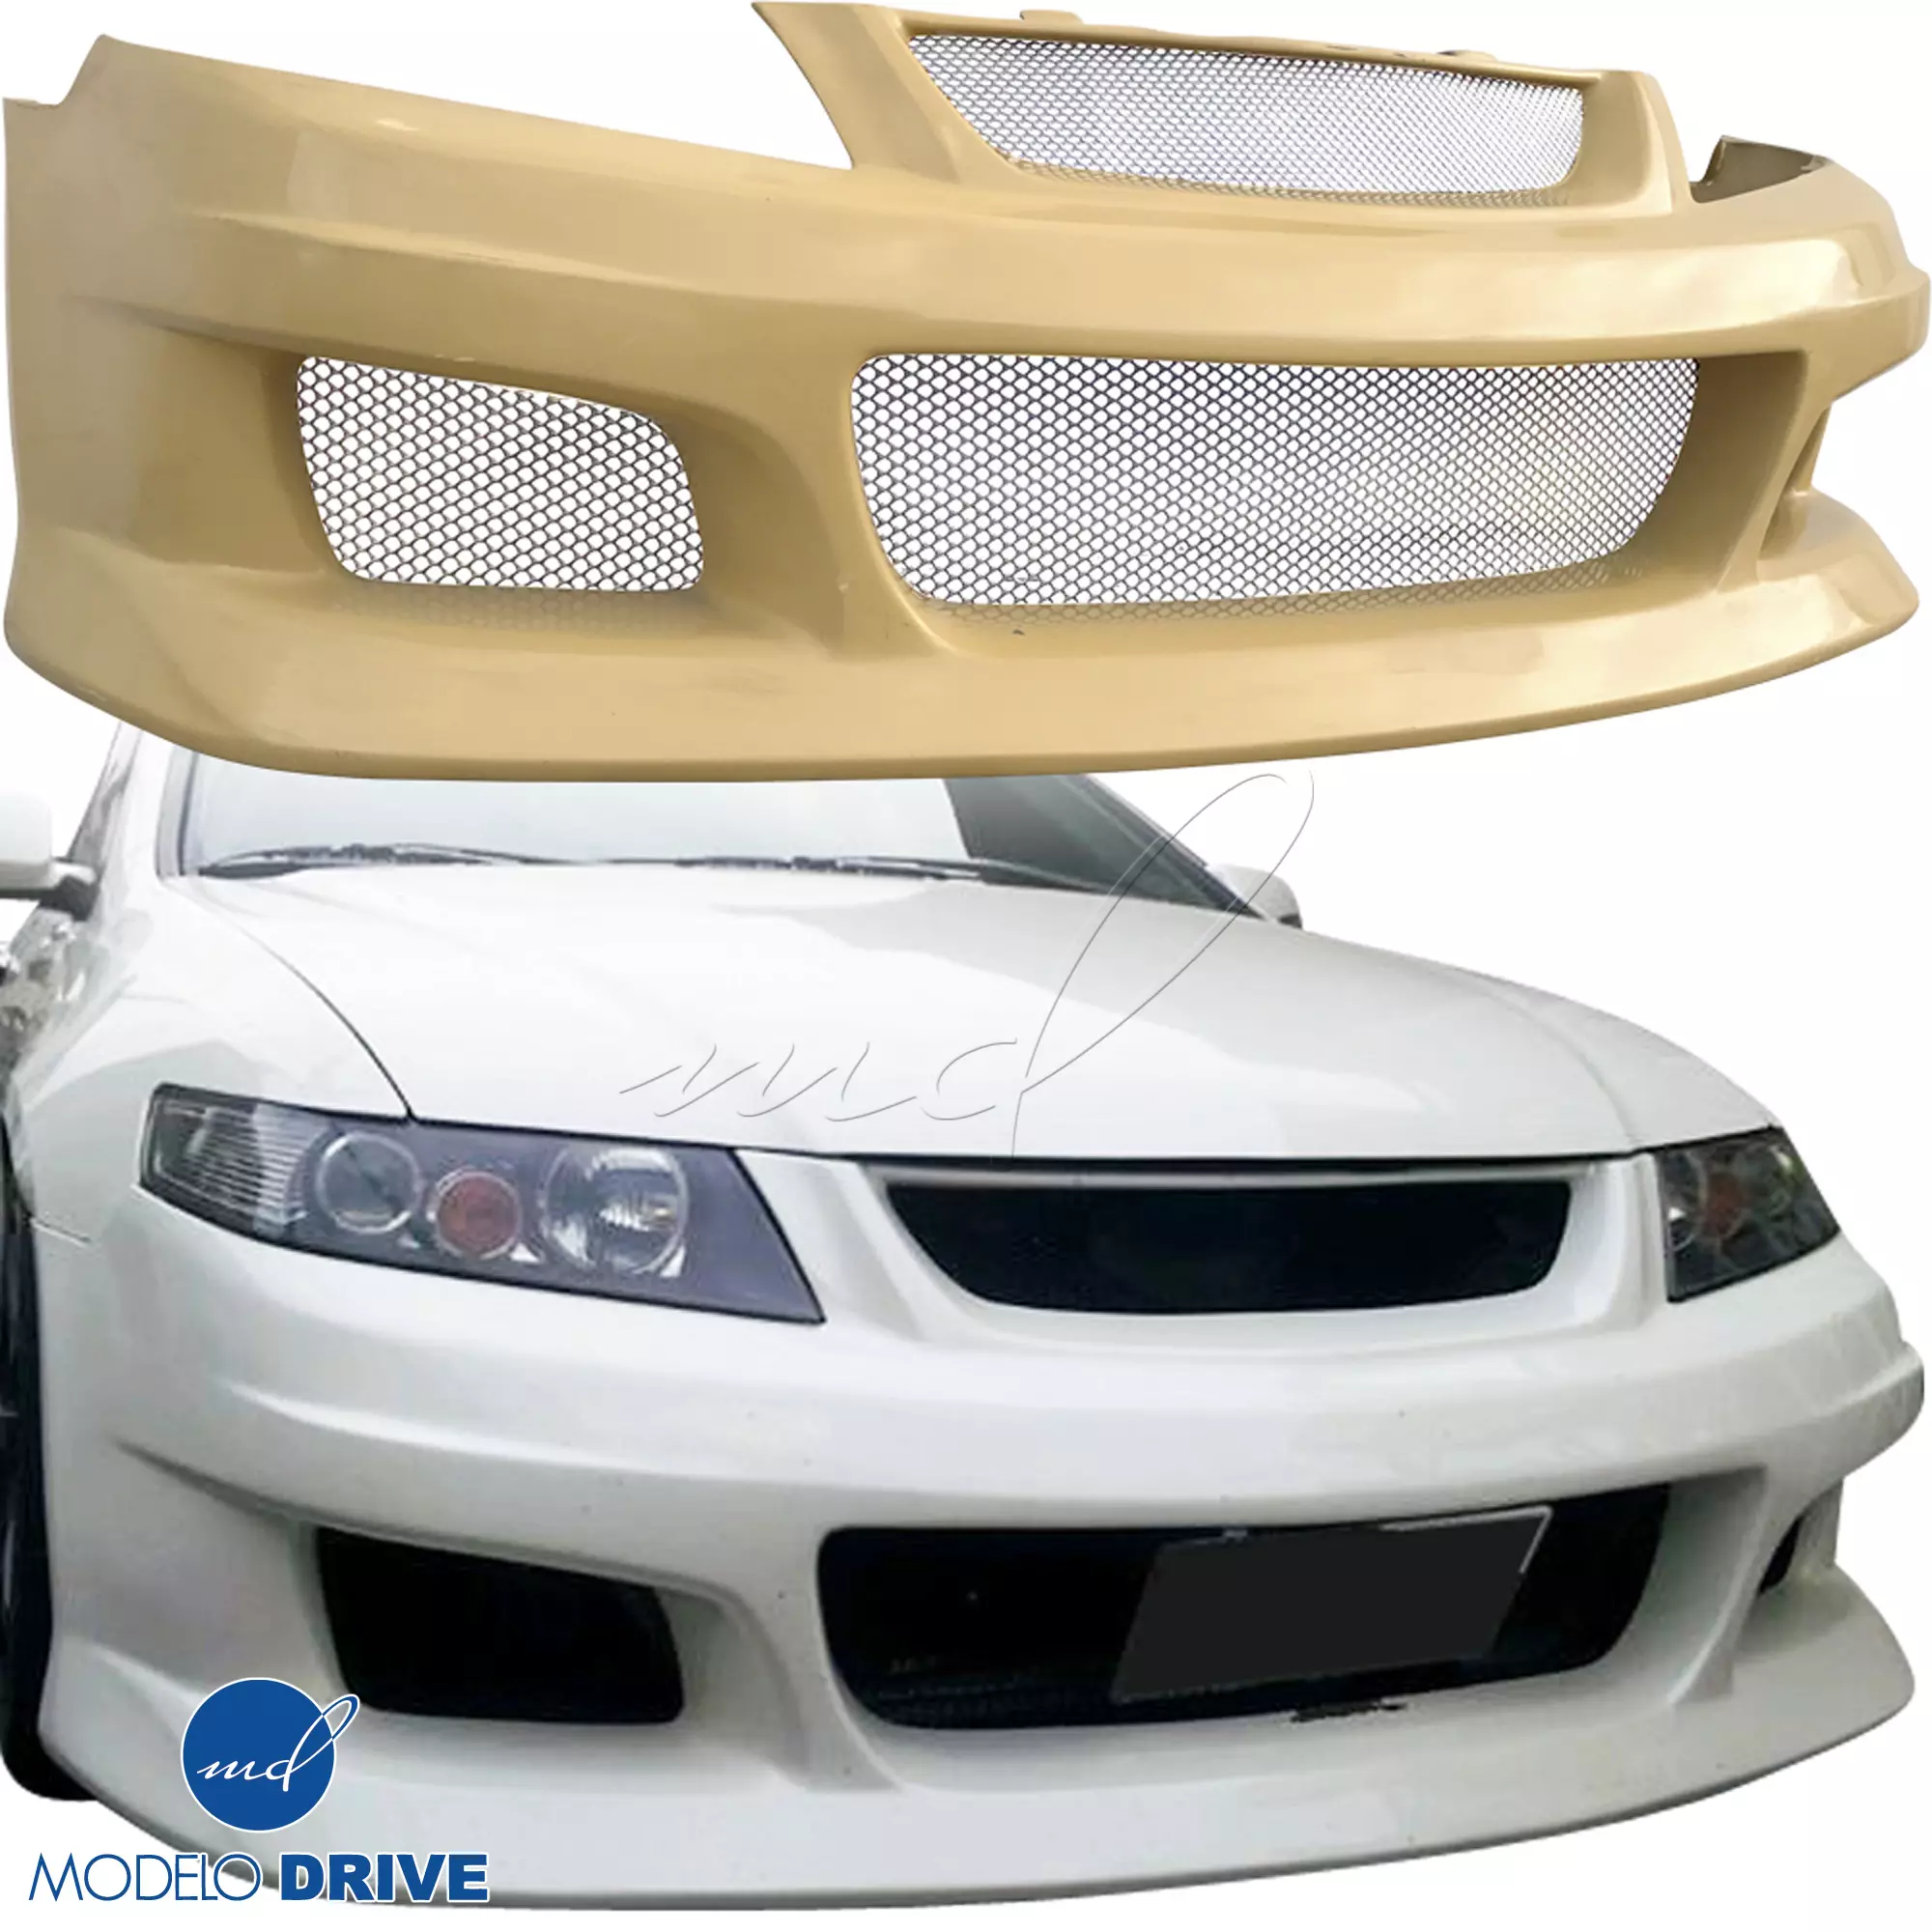 ModeloDrive FRP PHAS Front Bumper > Acura TSX CL9 2004-2008 - Image 1